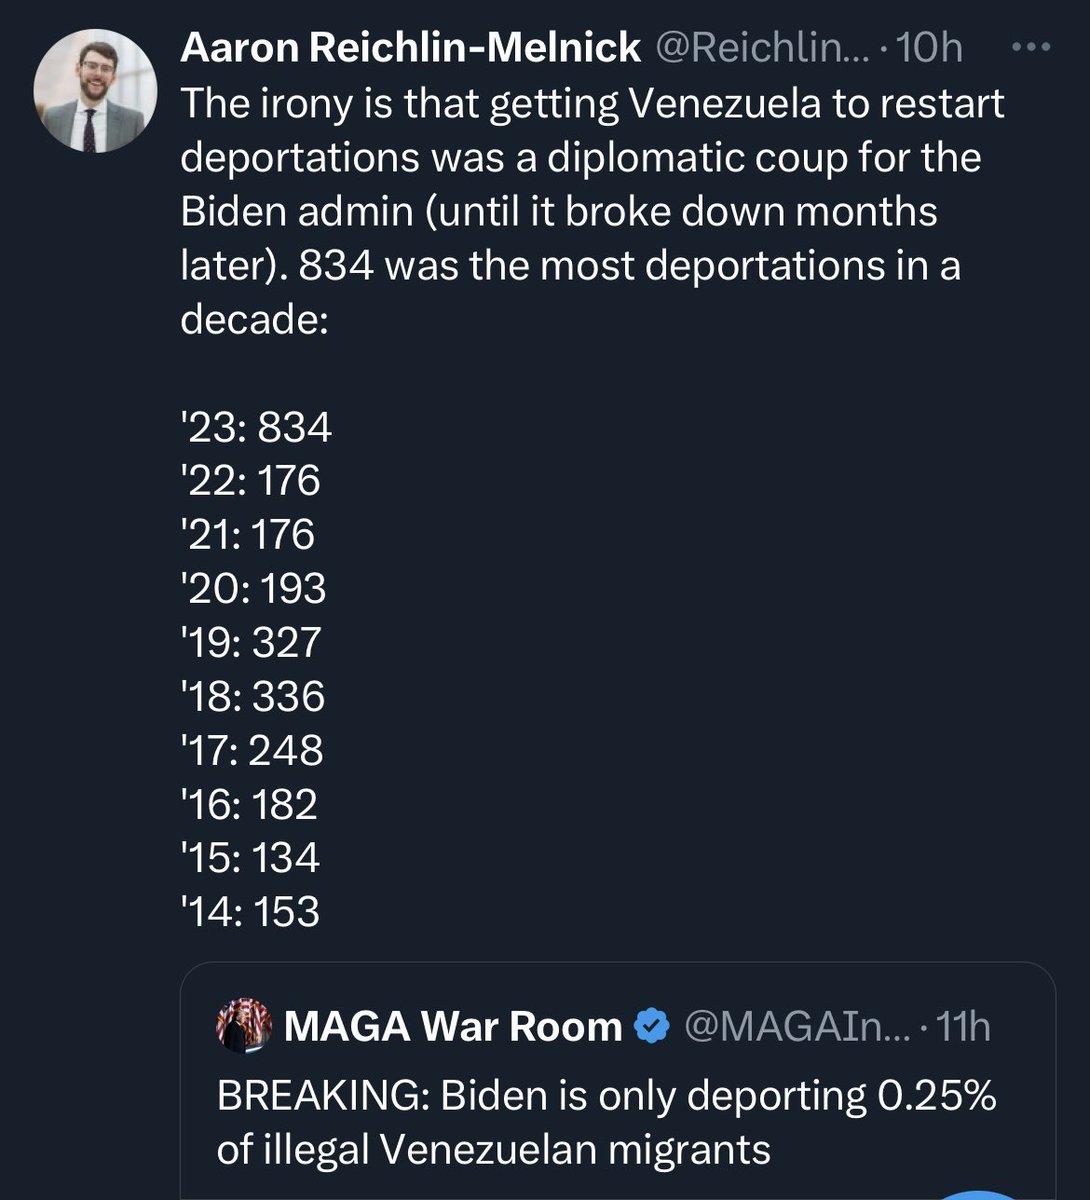 And, Trump signed an Executive Order on his way out the door to pay back his friends in South Florida which prohibited deportations of Venezuelans for a while. Right-wingers’ perception of Trump’s record on the border is based on a fantasy he has conjured up.